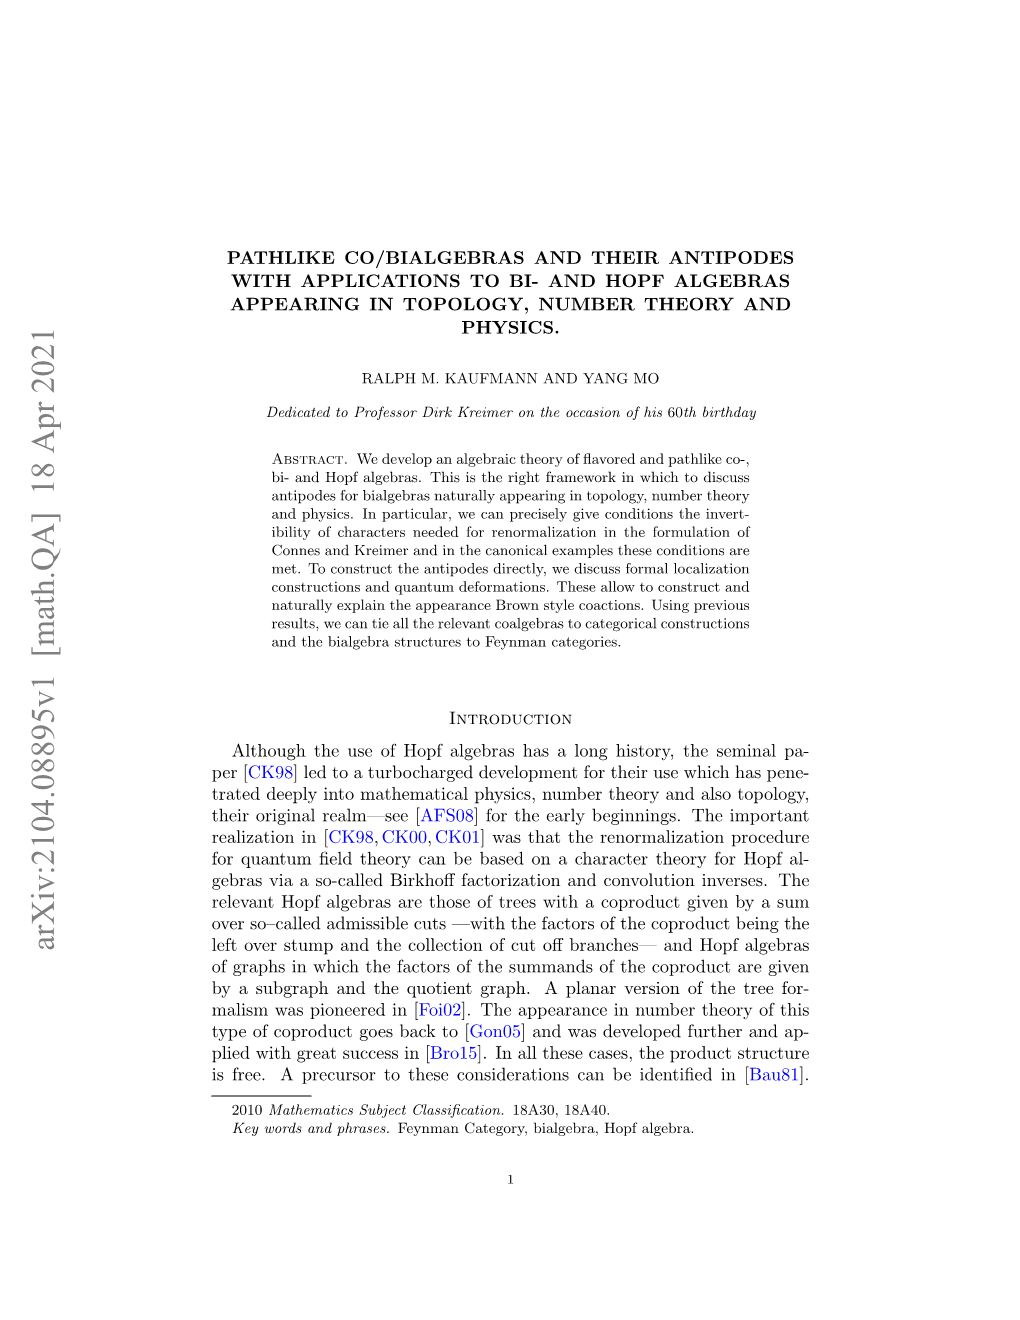 Pathlike Co/Bialgebras and Their Antipodes with Applications to Bi- and Hopf Algebras Appearing in Topology, Number Theory and Physics